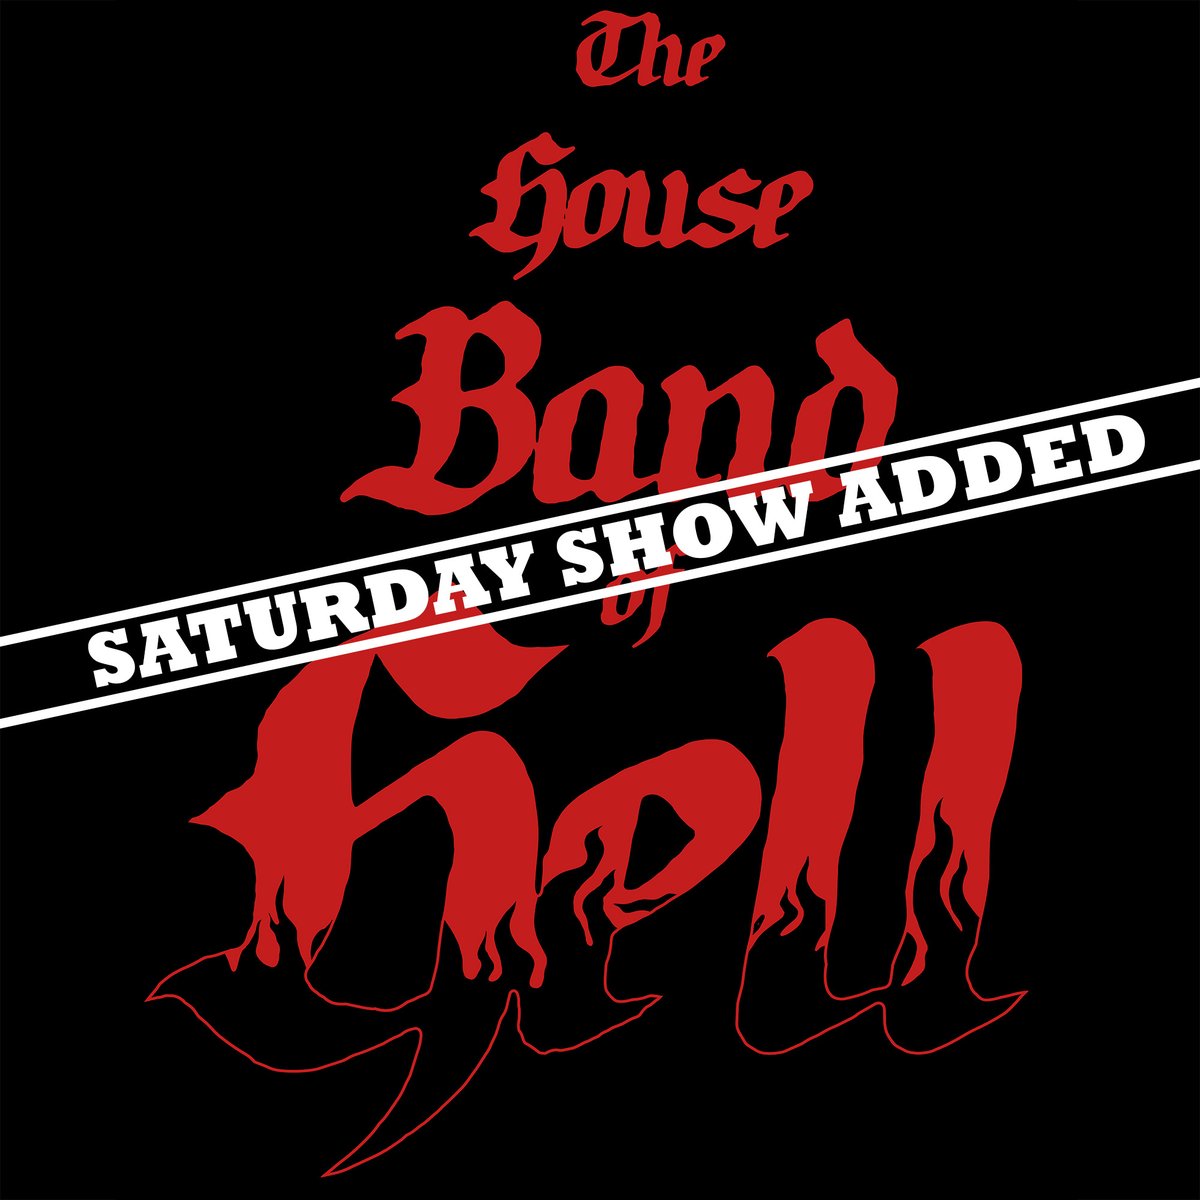 BRUCE ANNOUNCES SECOND SHOW AT THE WHISKY! Saturday 13th April - Whisky a Go Go, LA Tickets on sale at the box office Friday! More info whiskyagogo.com #BruceDickinson #TheHouseBandOfHell #TheMandrakeProject #Tour #LA